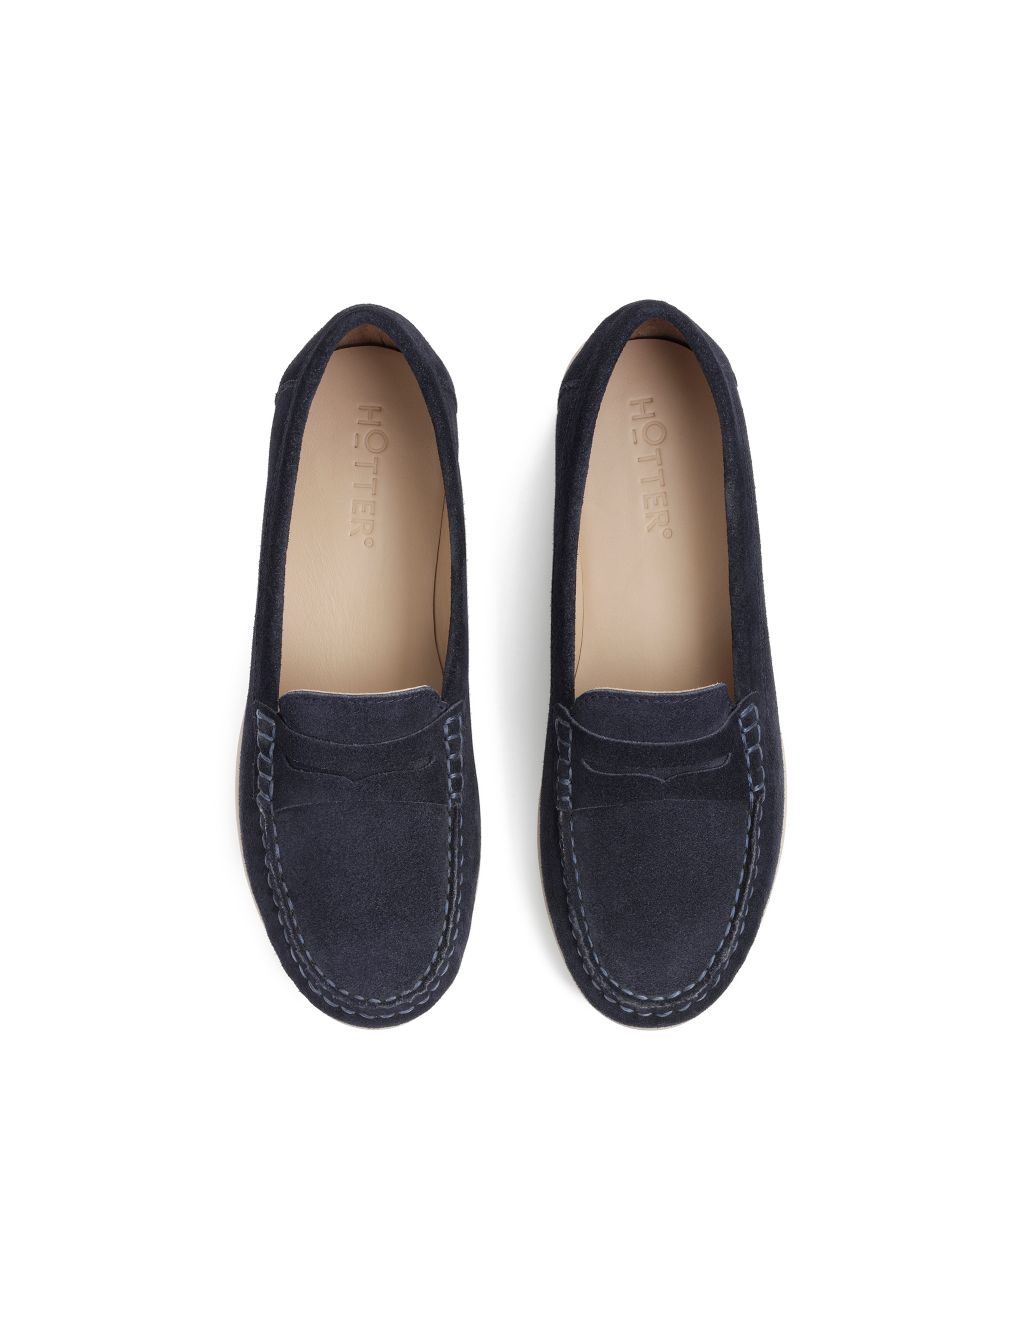 Pier Suede Flat Loafers image 3